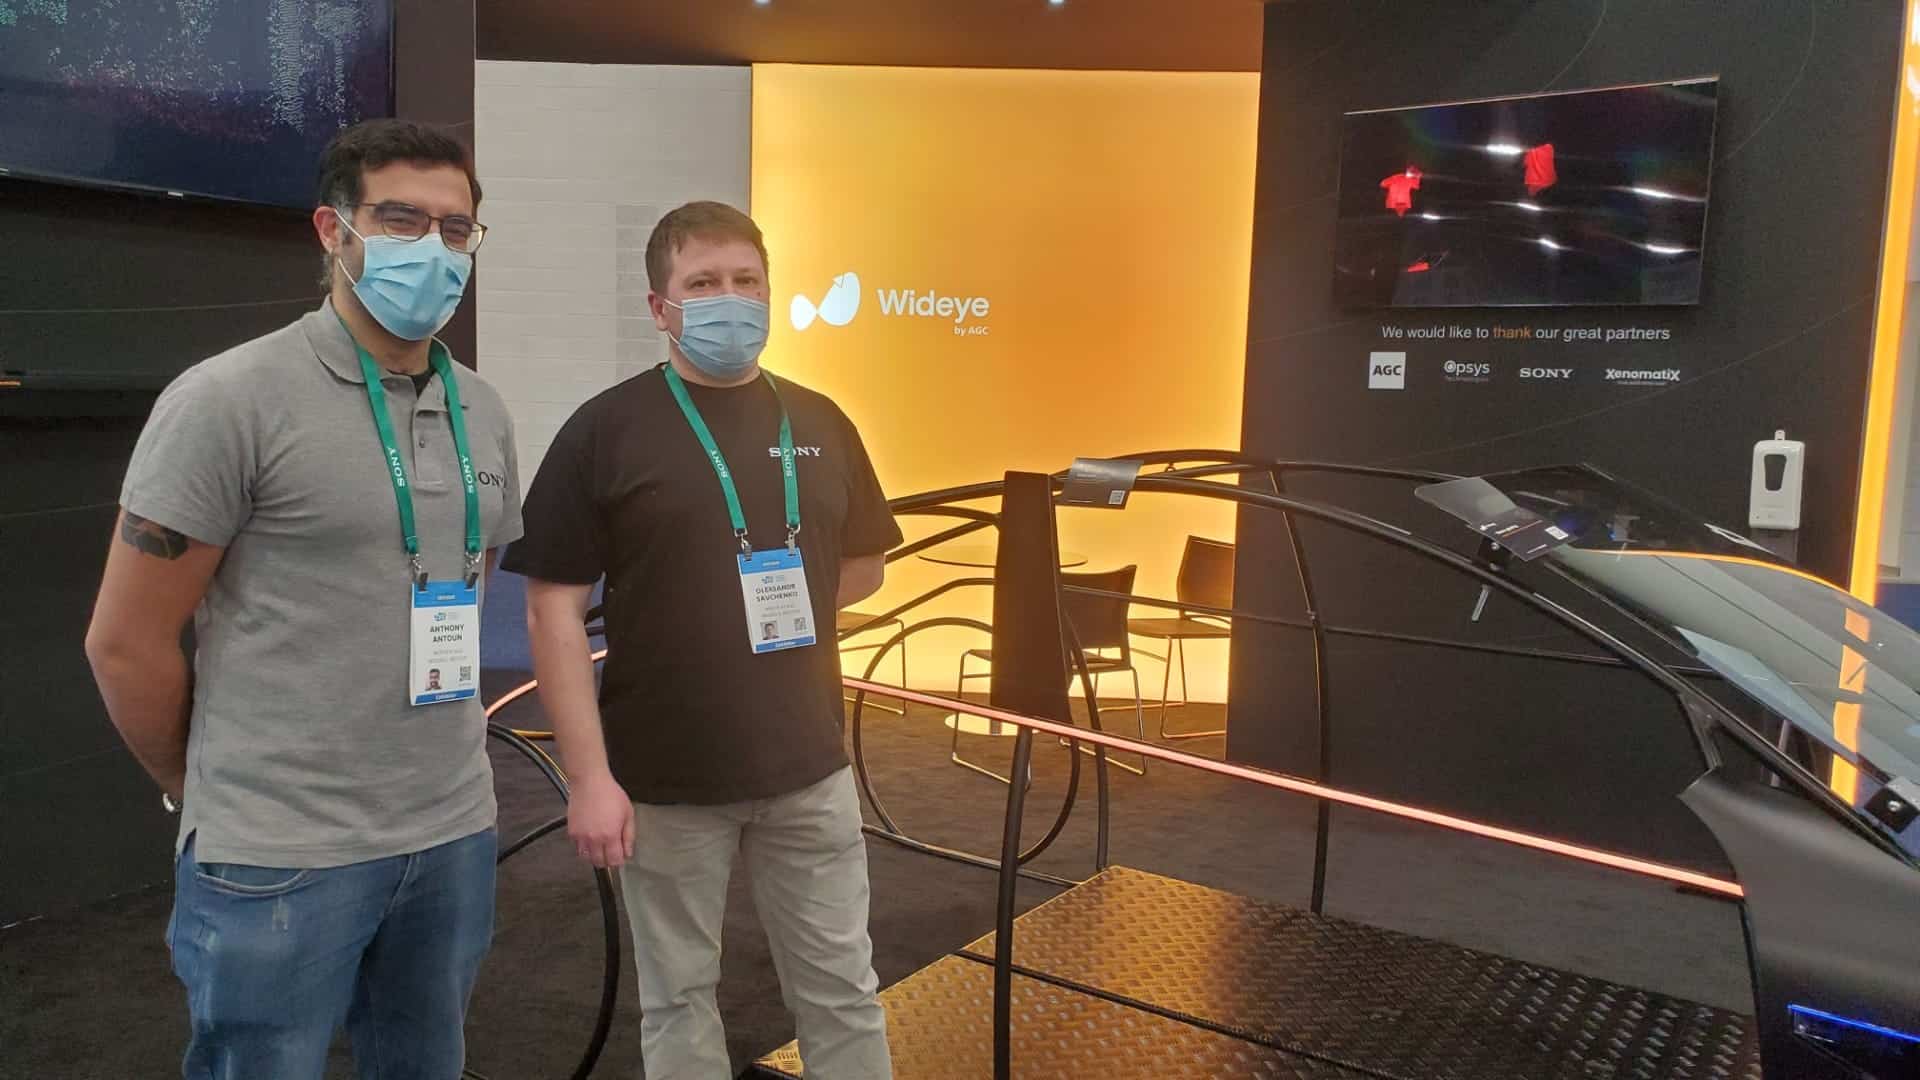 Colleagues Sony Depthsensing SOlutions B-pillar application CES 2022